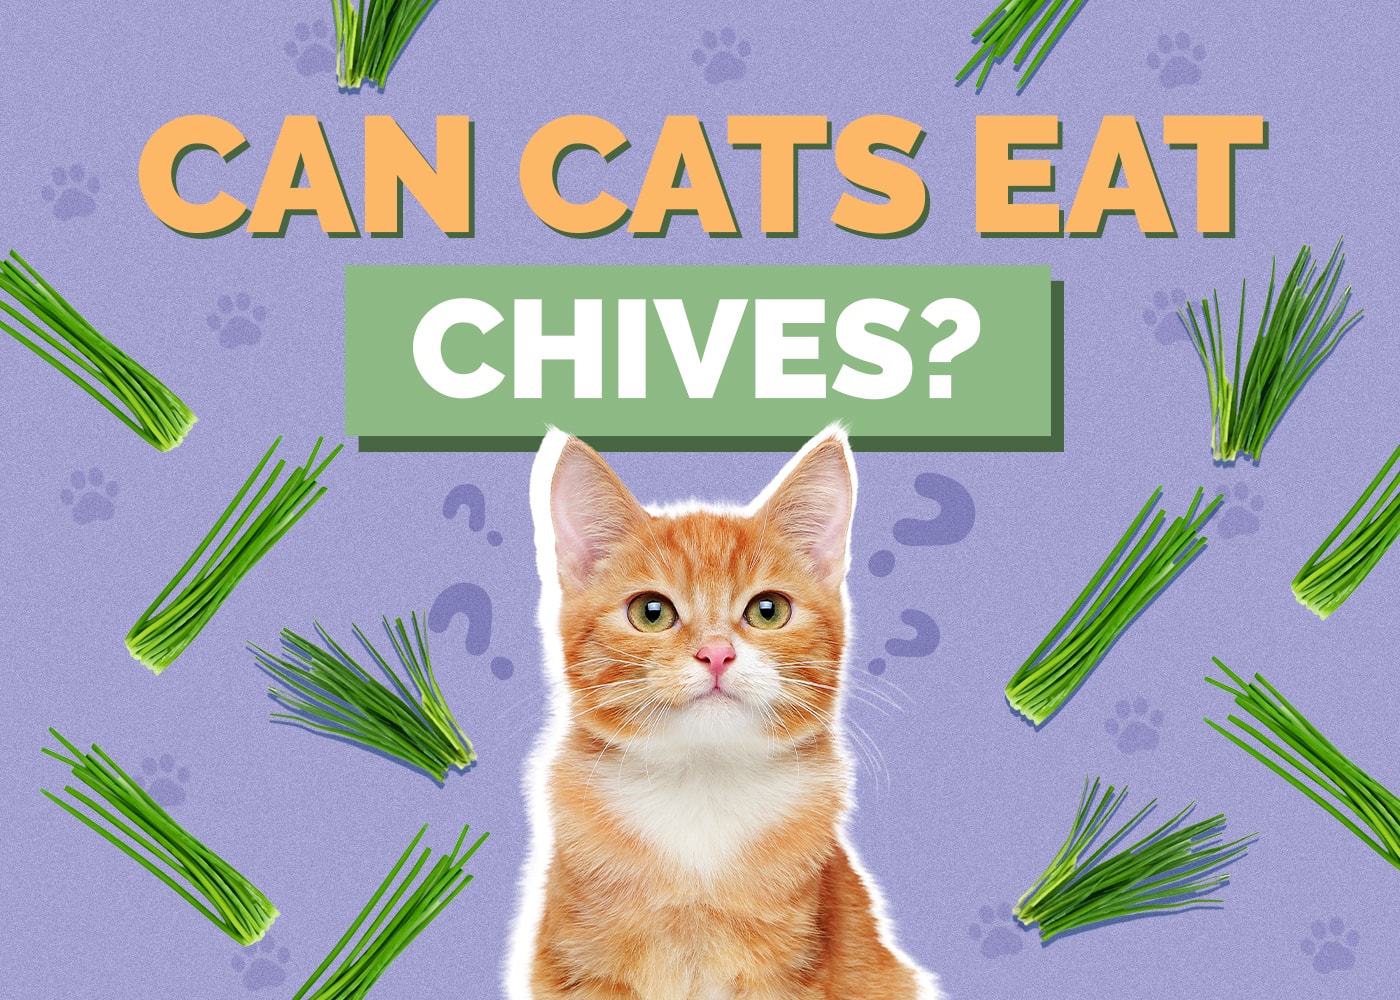 Can Cats Eat chives